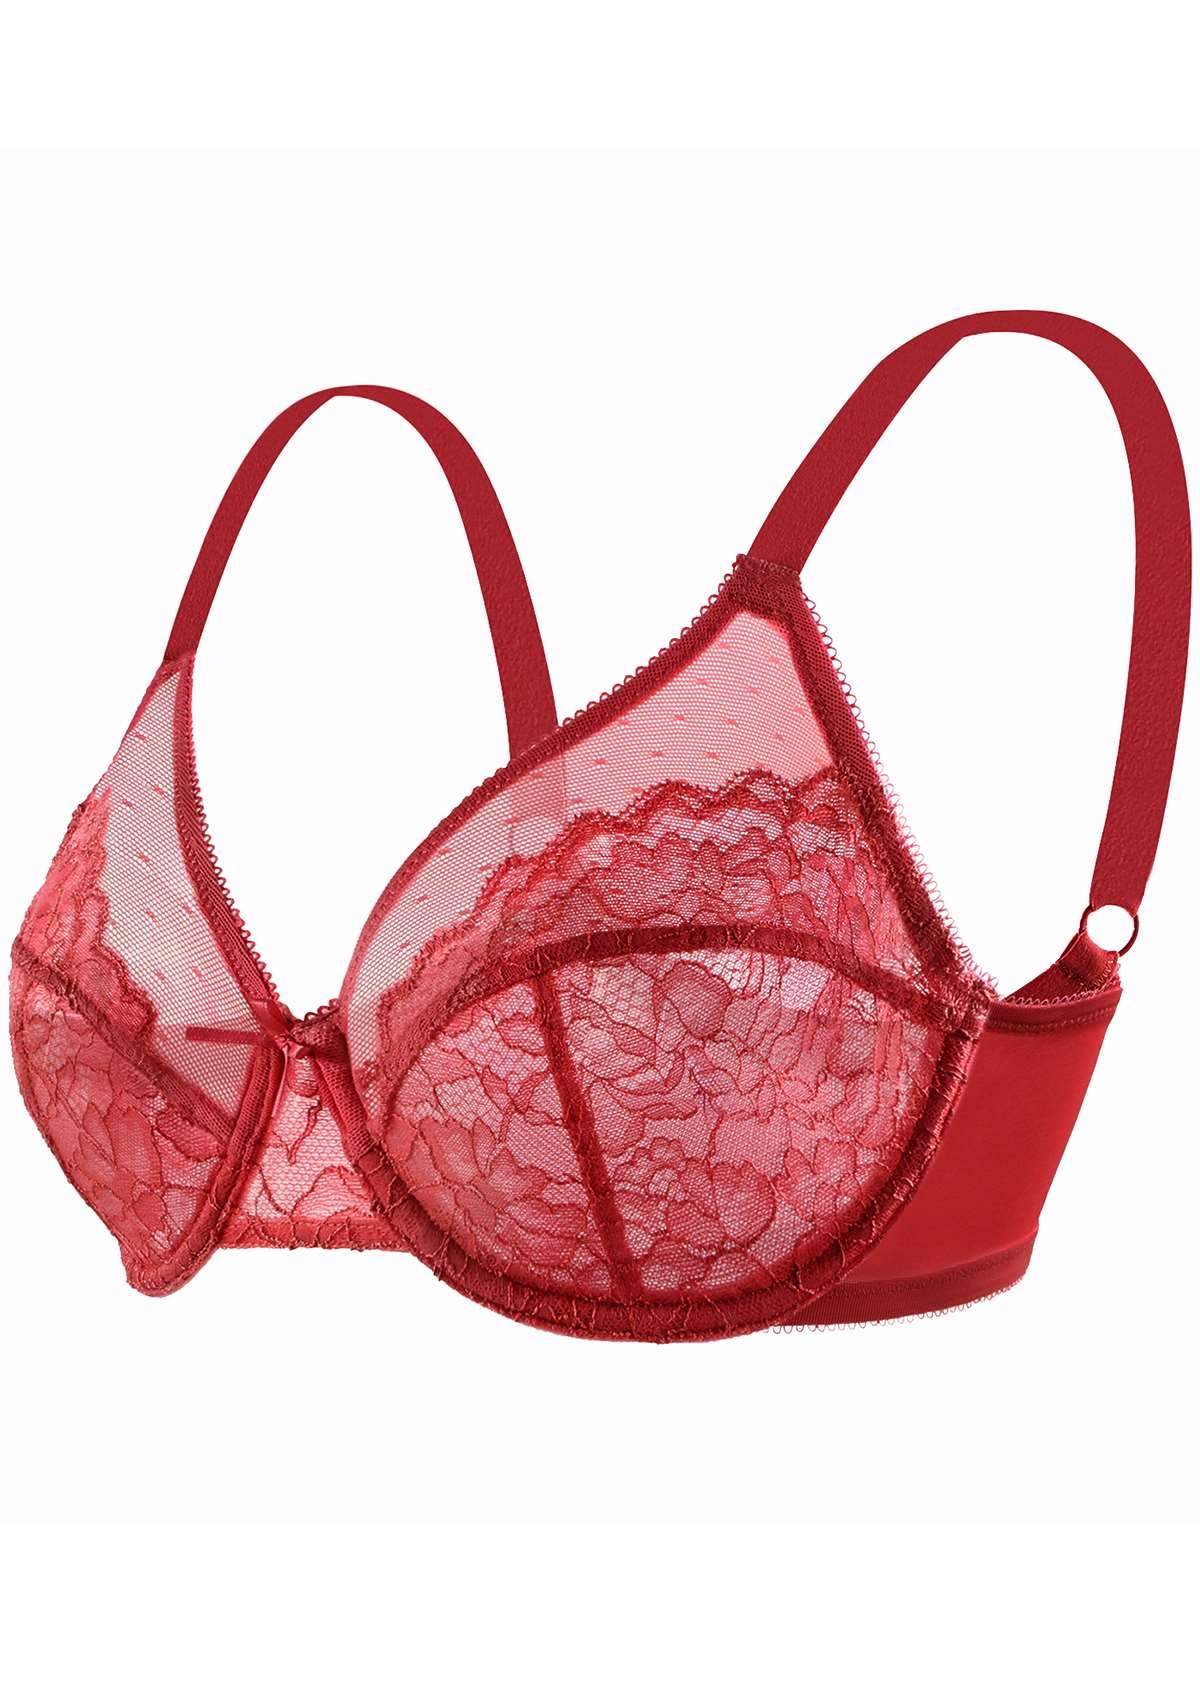 HSIA Enchante Full Support Lace Underwire Bra: Ideal For Big Breasts - Red / 34 / D